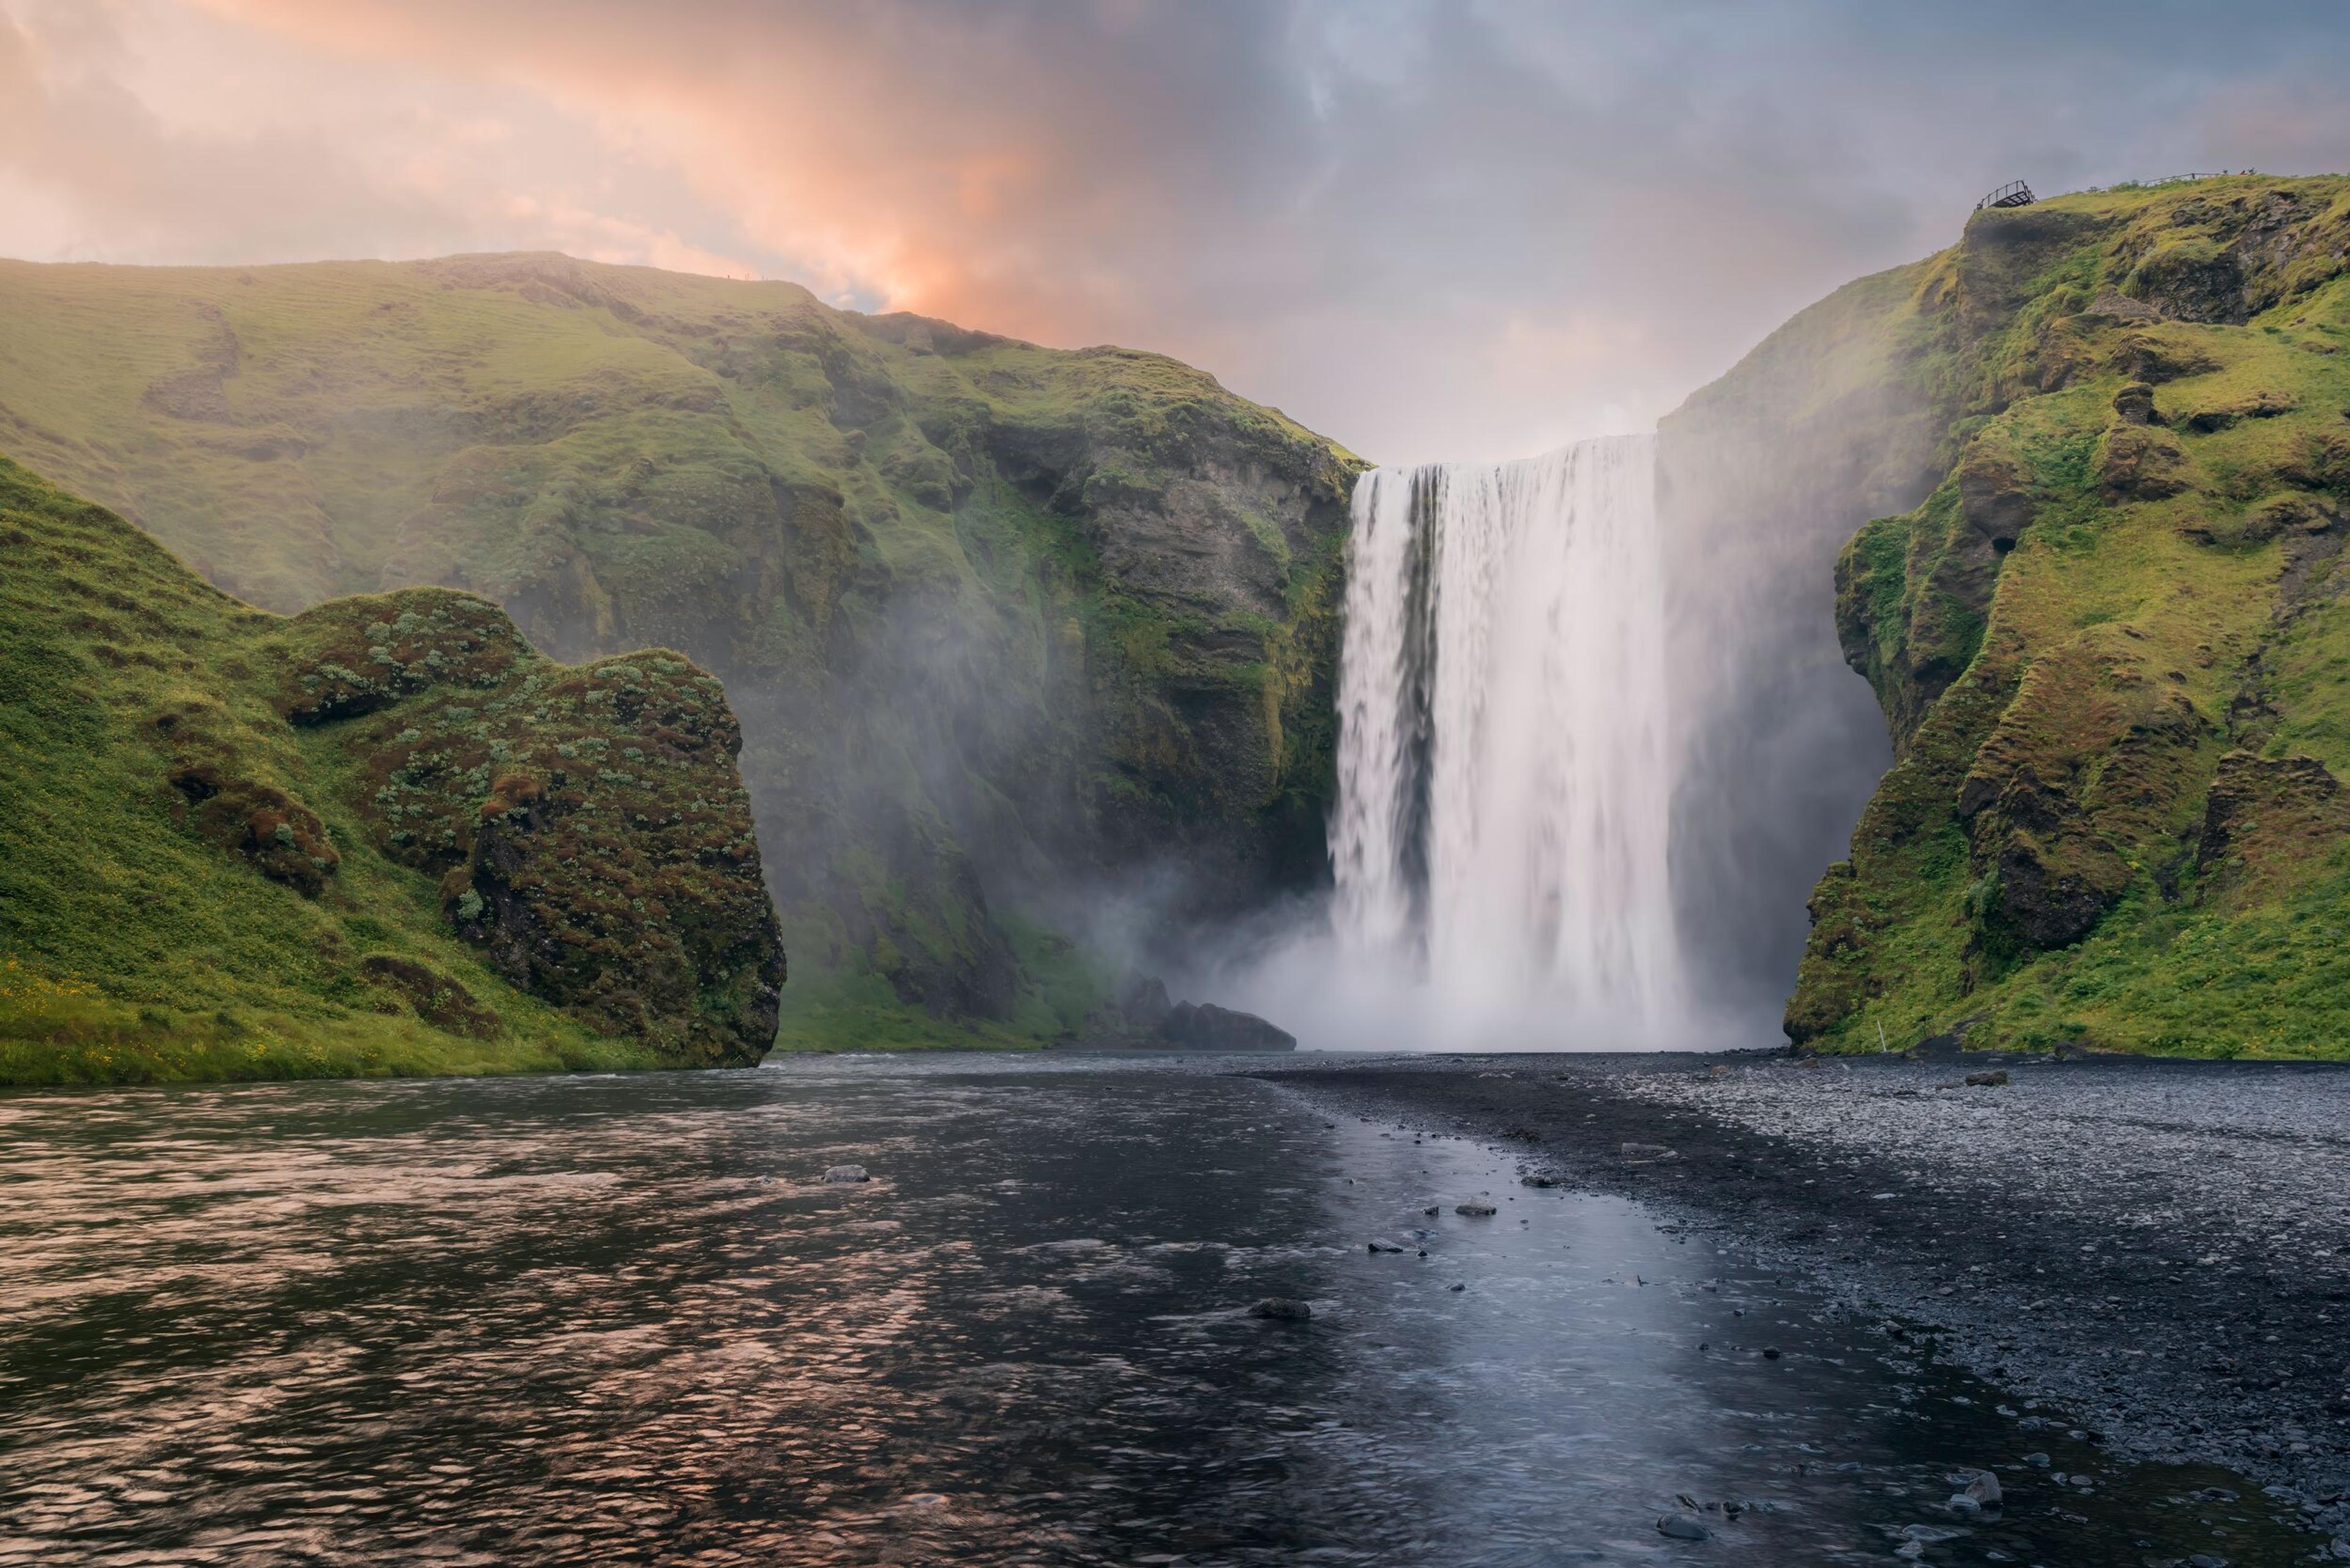 Skógafoss Waterfall during sunset. South coast of Iceland.